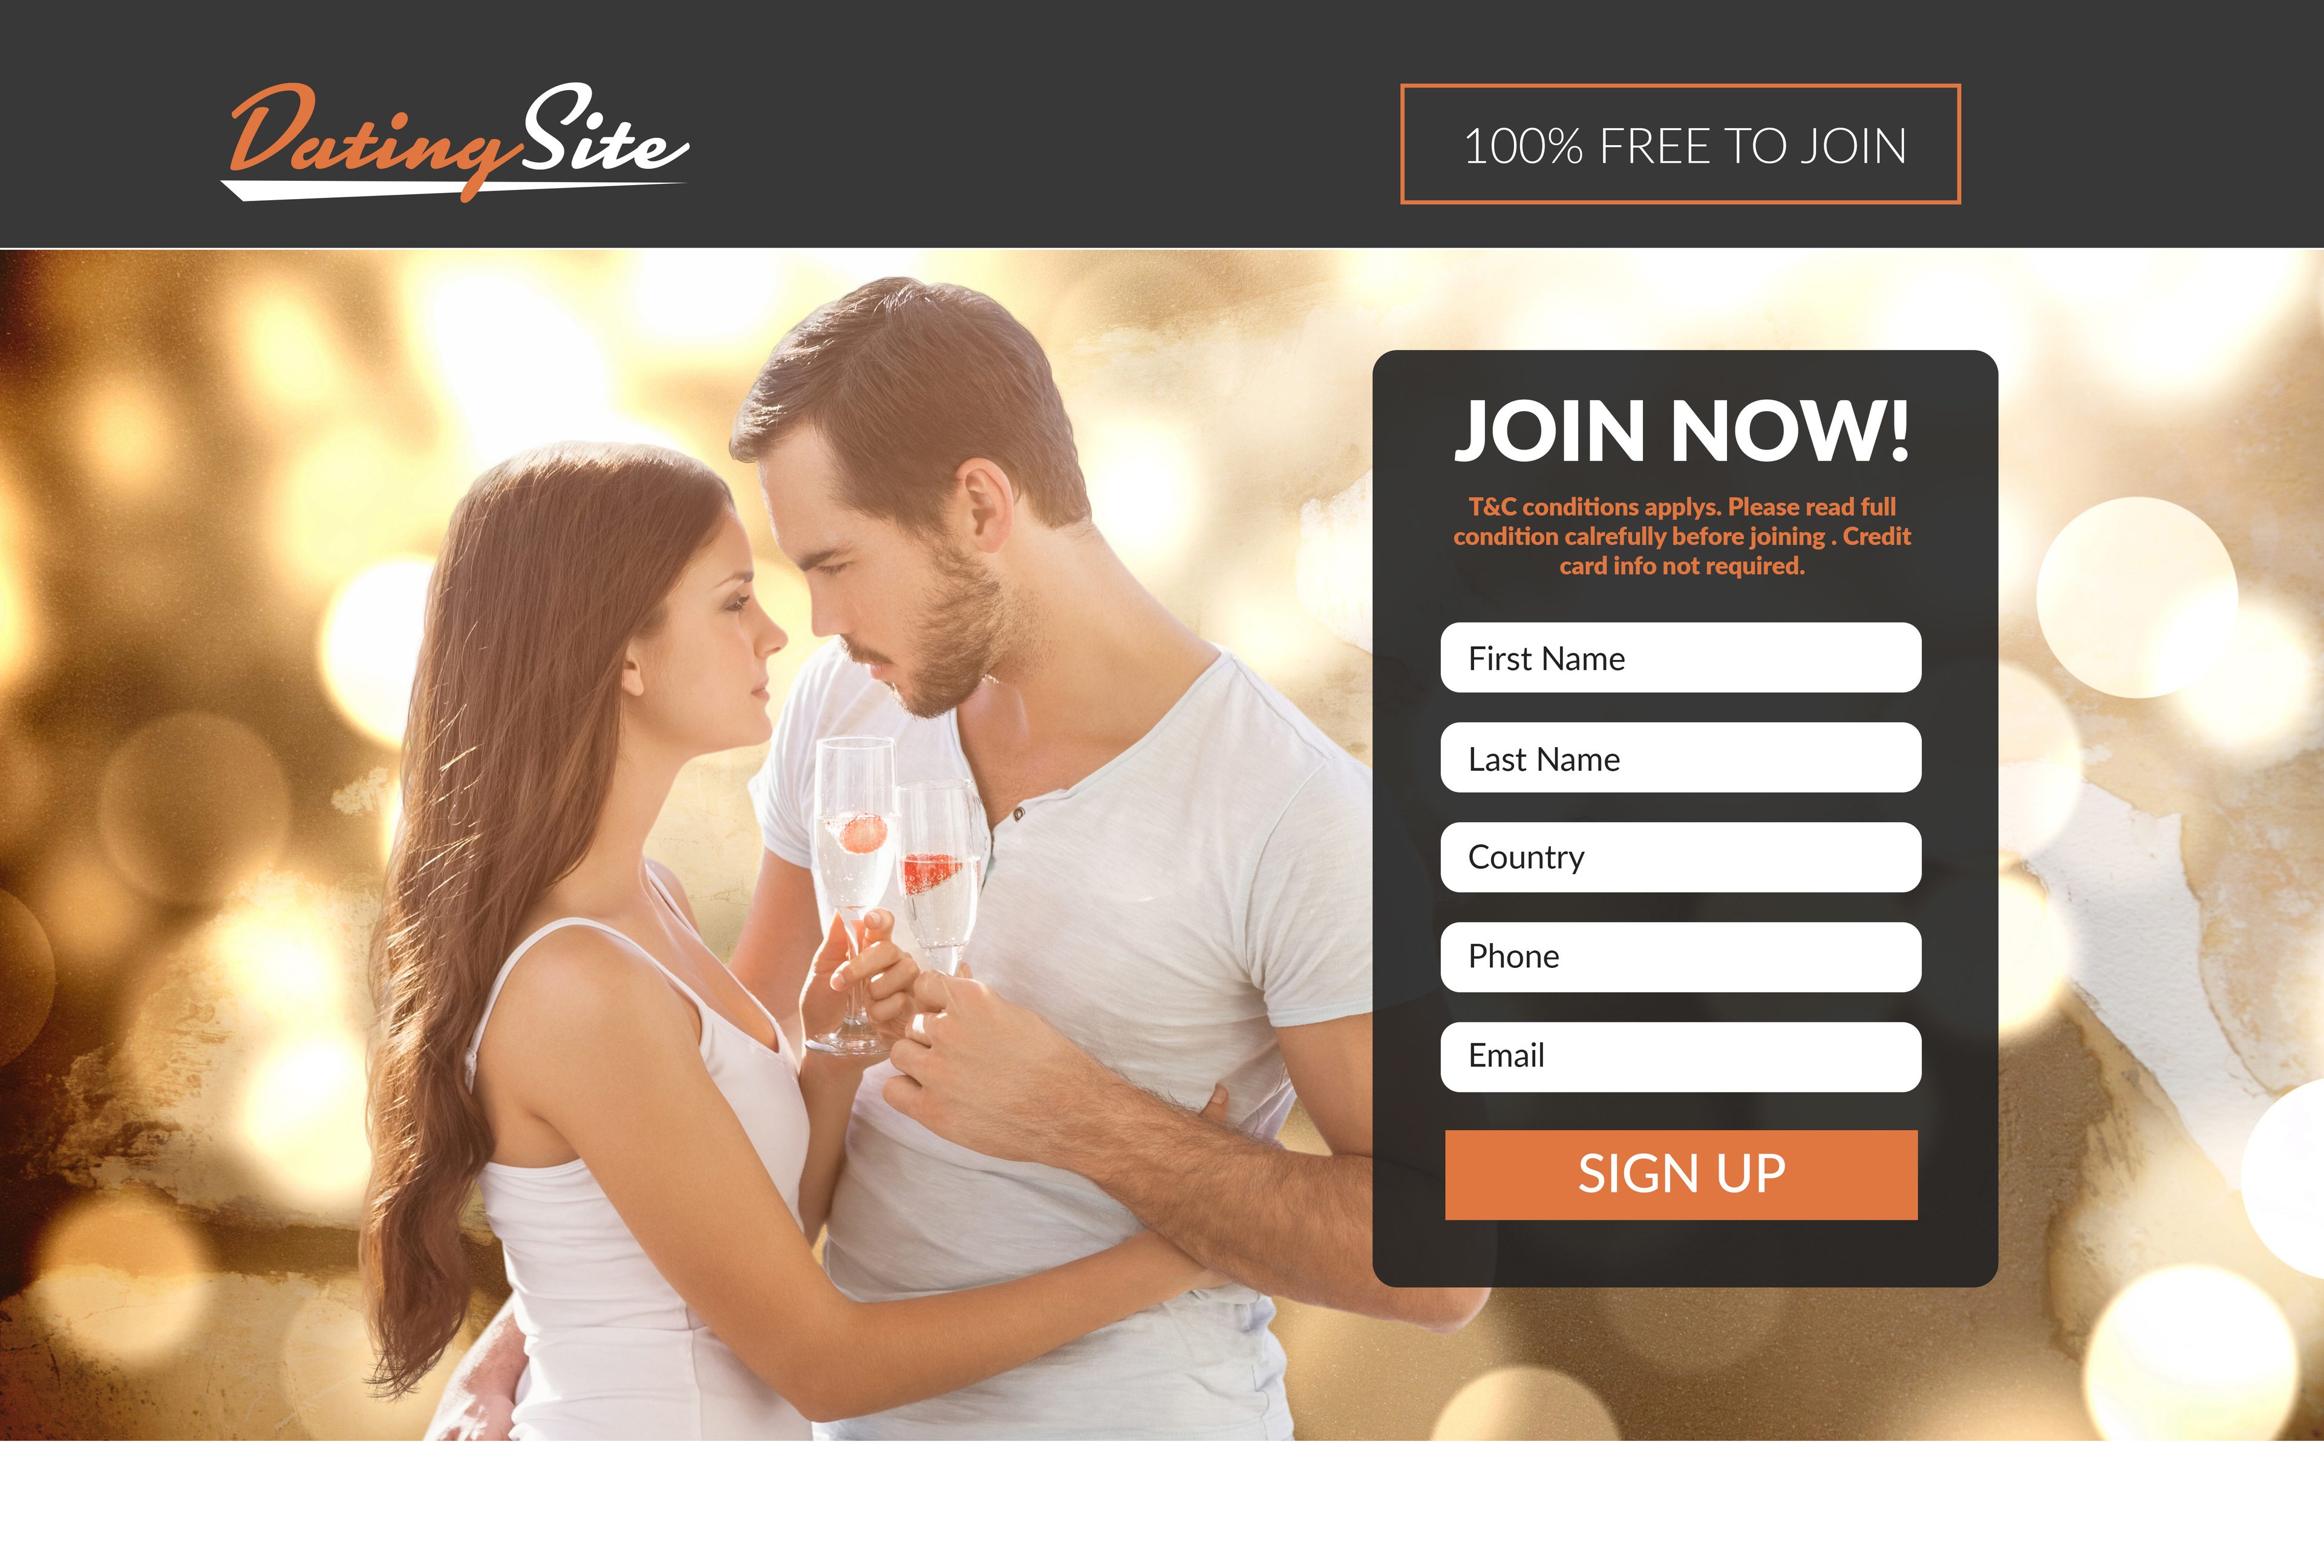 Why Do Women Sign Up On Dating Sites If They Never Intend To Go On Dates?